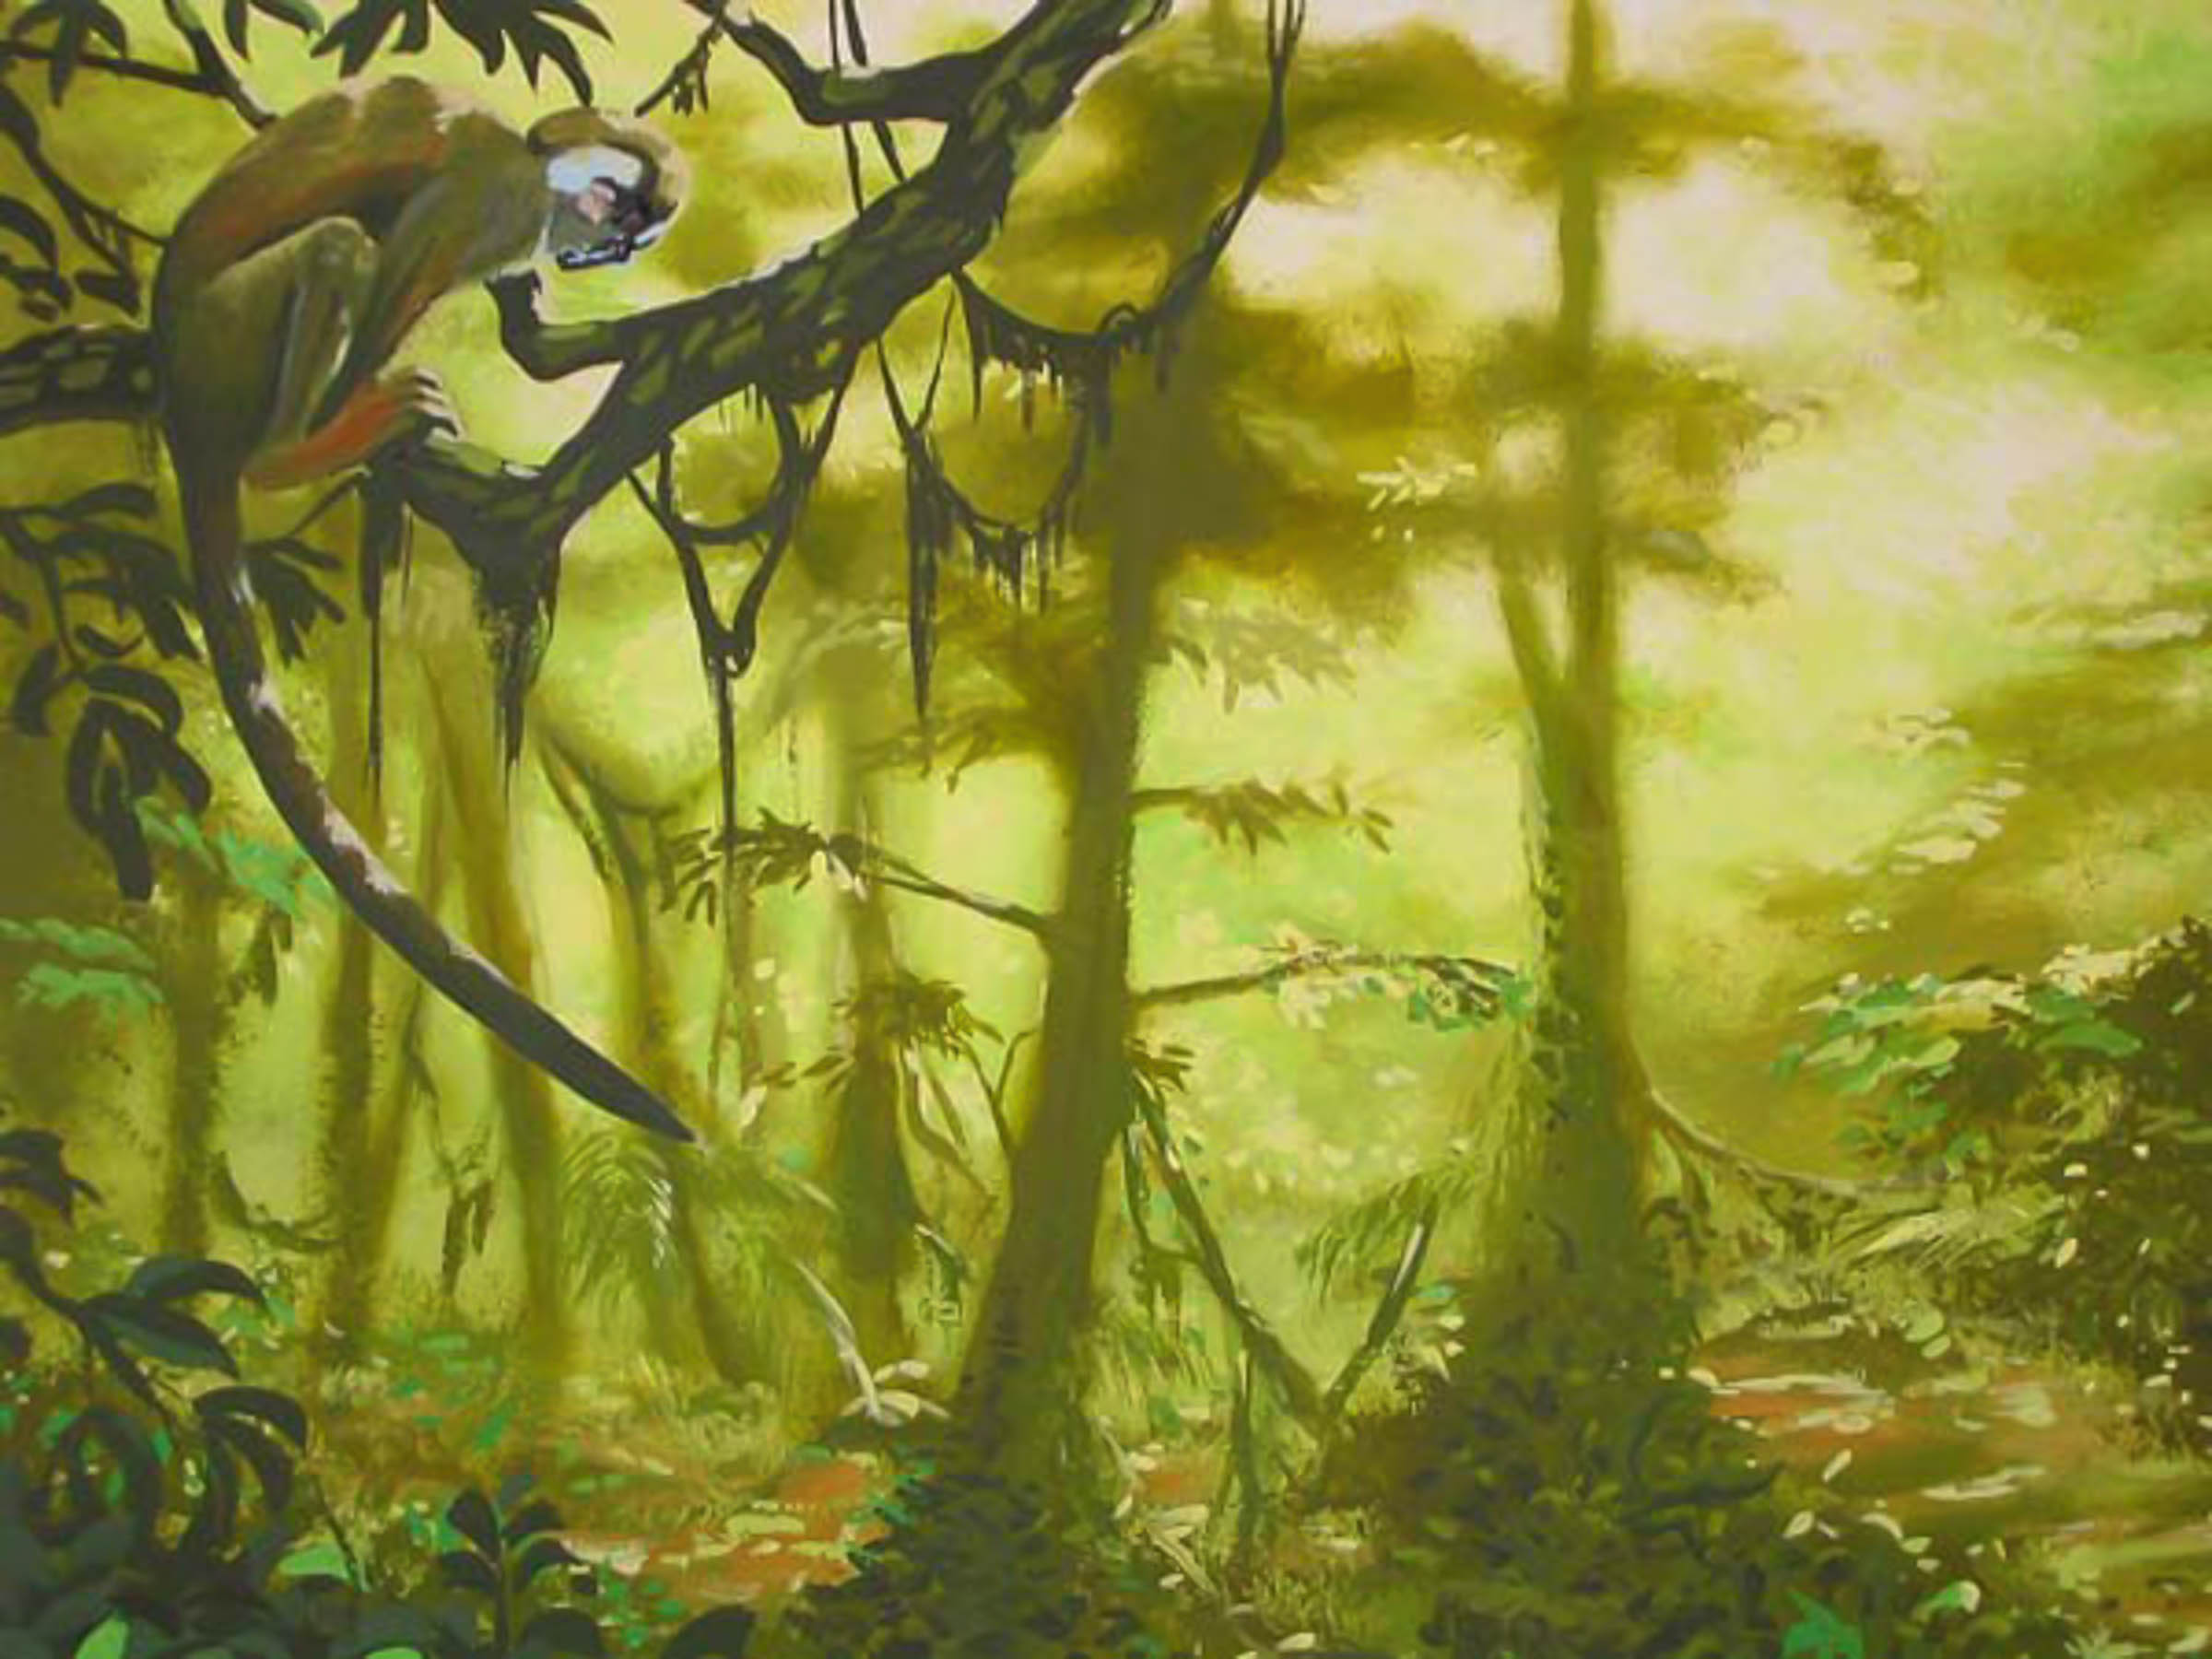 Monkey in sunlit sunlight jungle painting with light